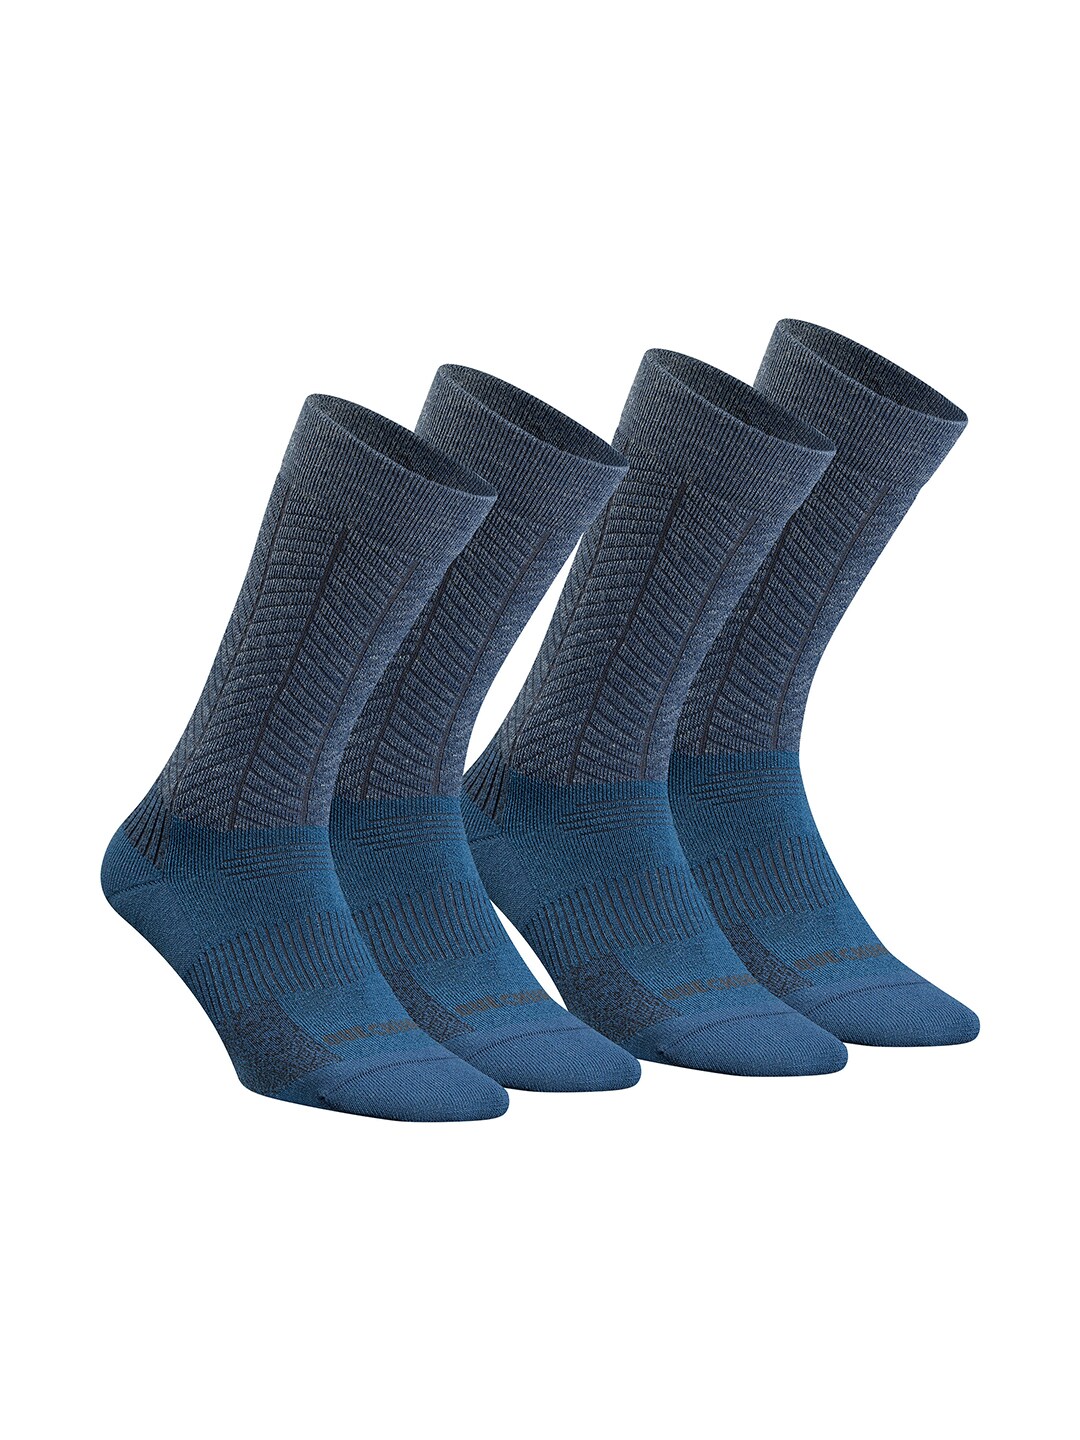 Quechua By Decathlon Unisex Blue Set of 2 Warm Hiking Socks Price in India